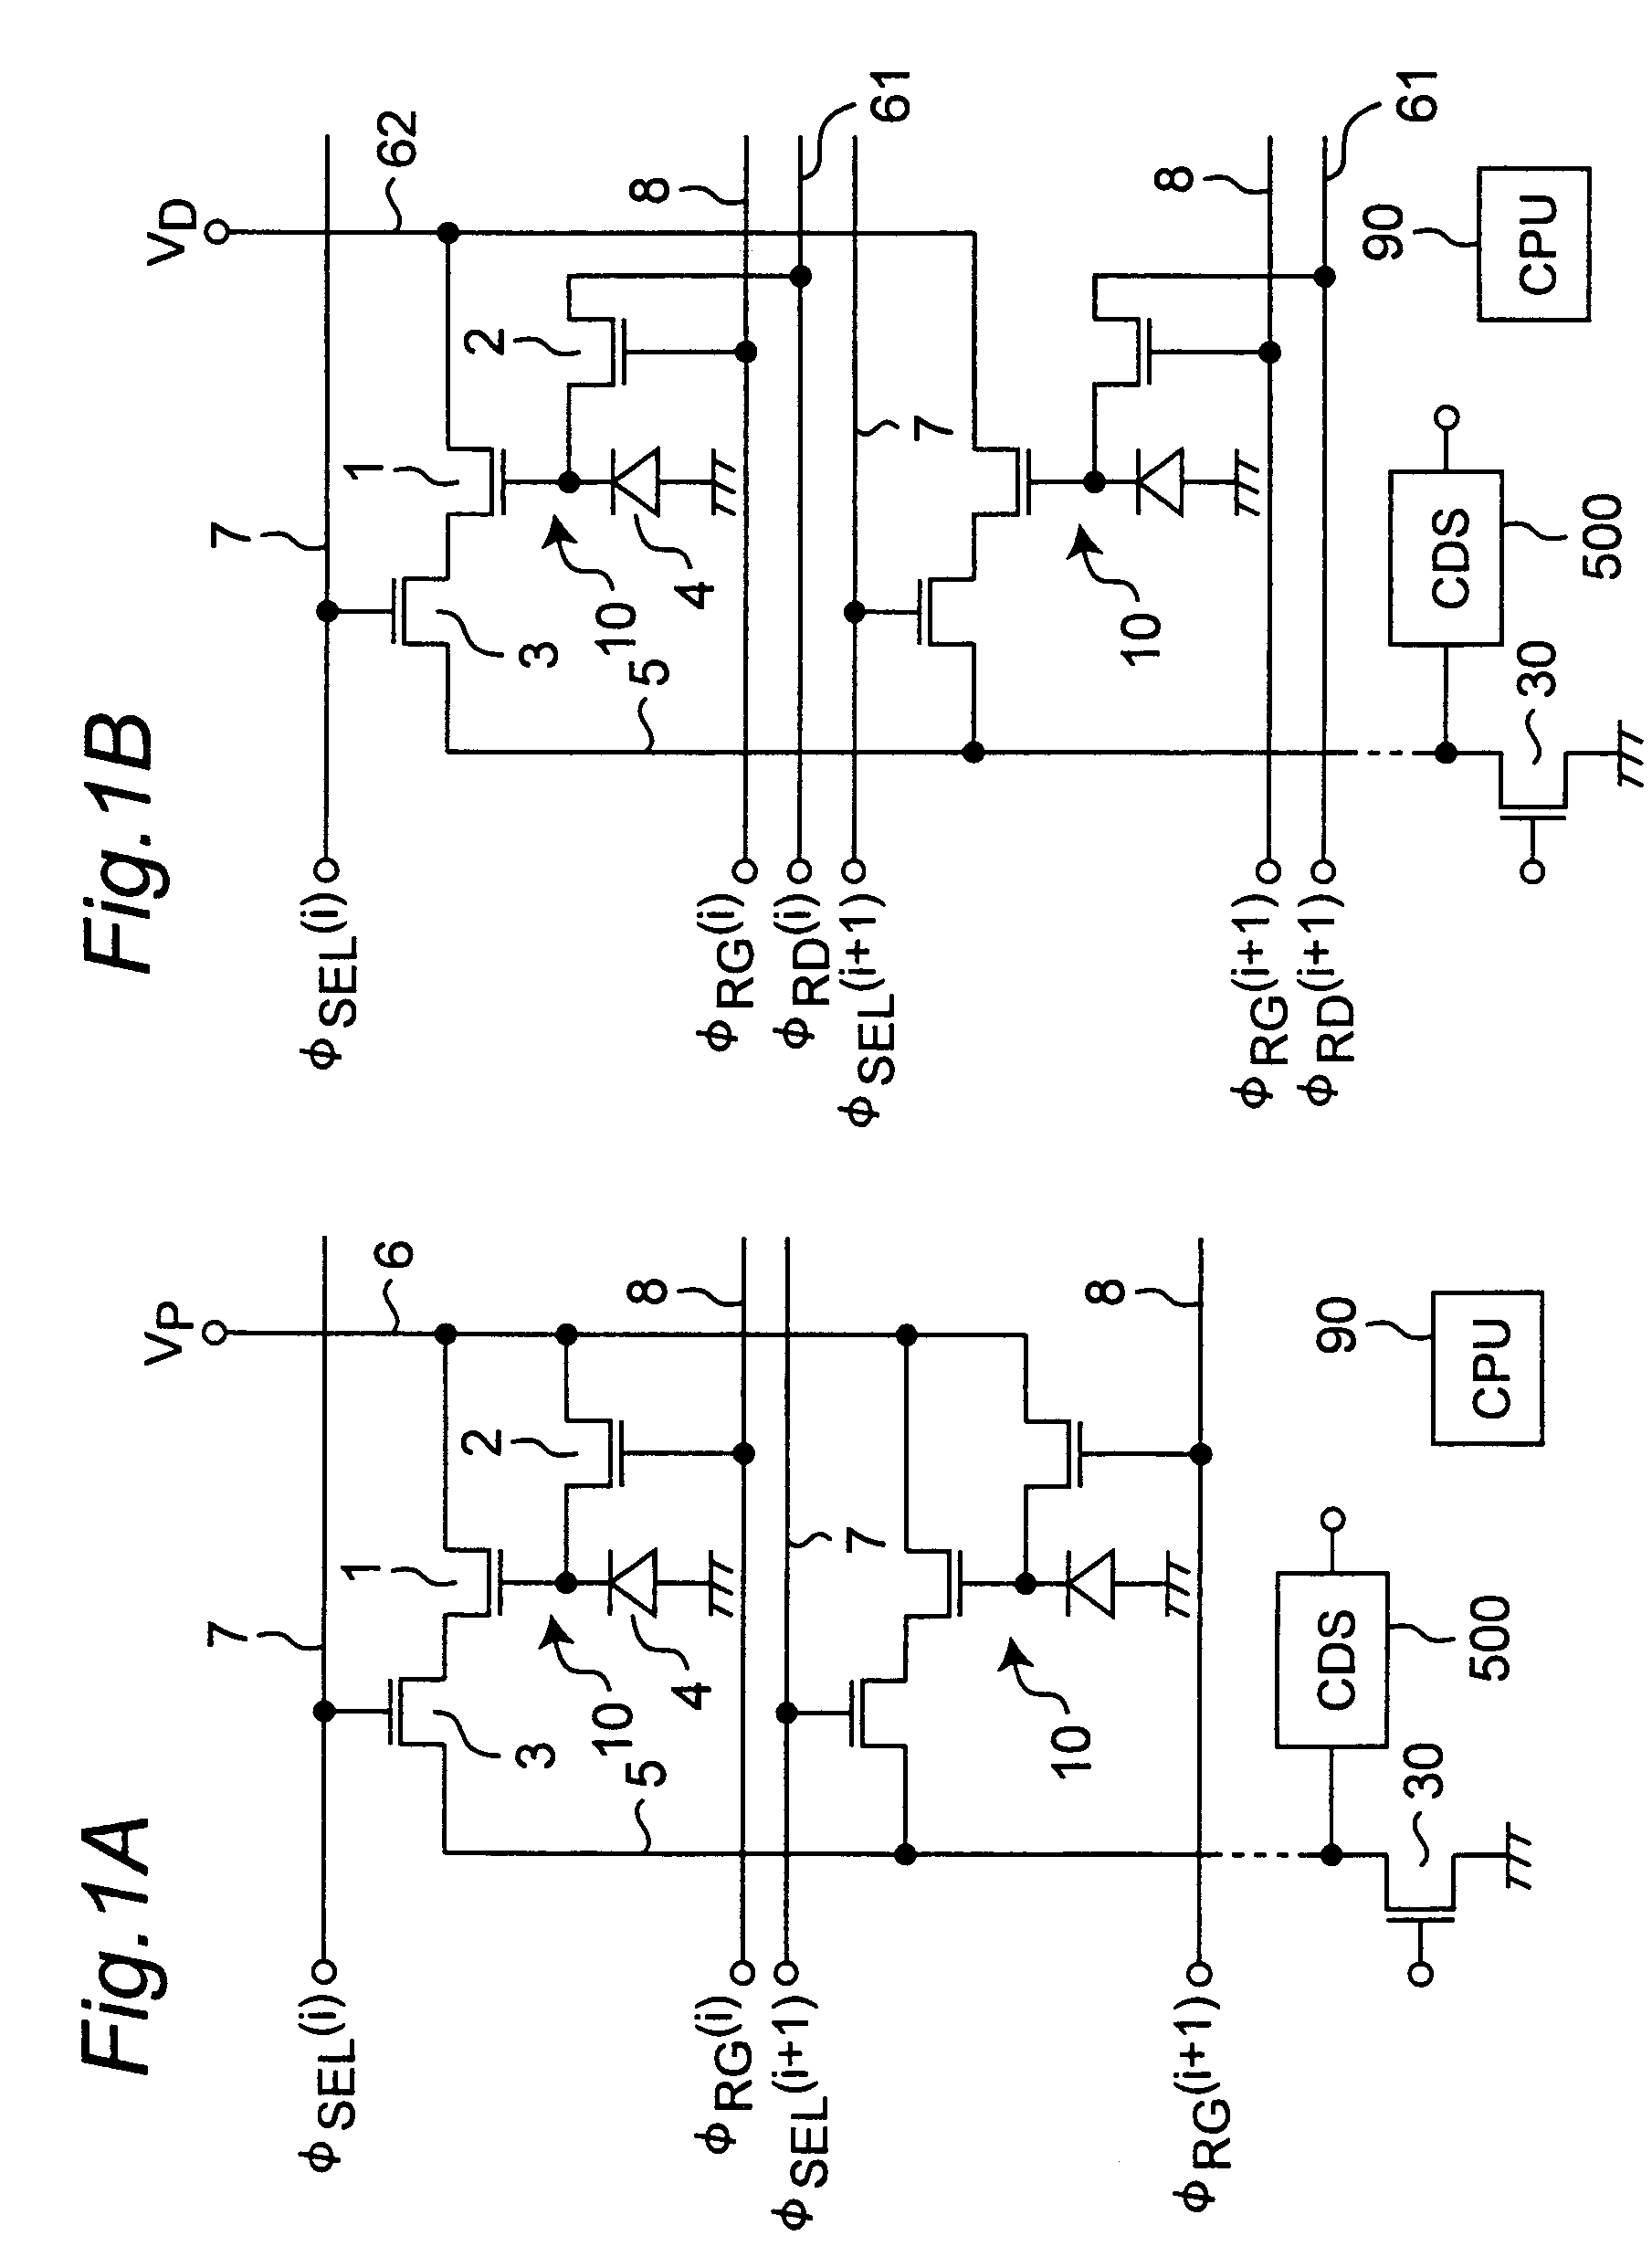 Amplification-type solid-state image pickup device incorporating plurality of arrayed pixels with amplification function